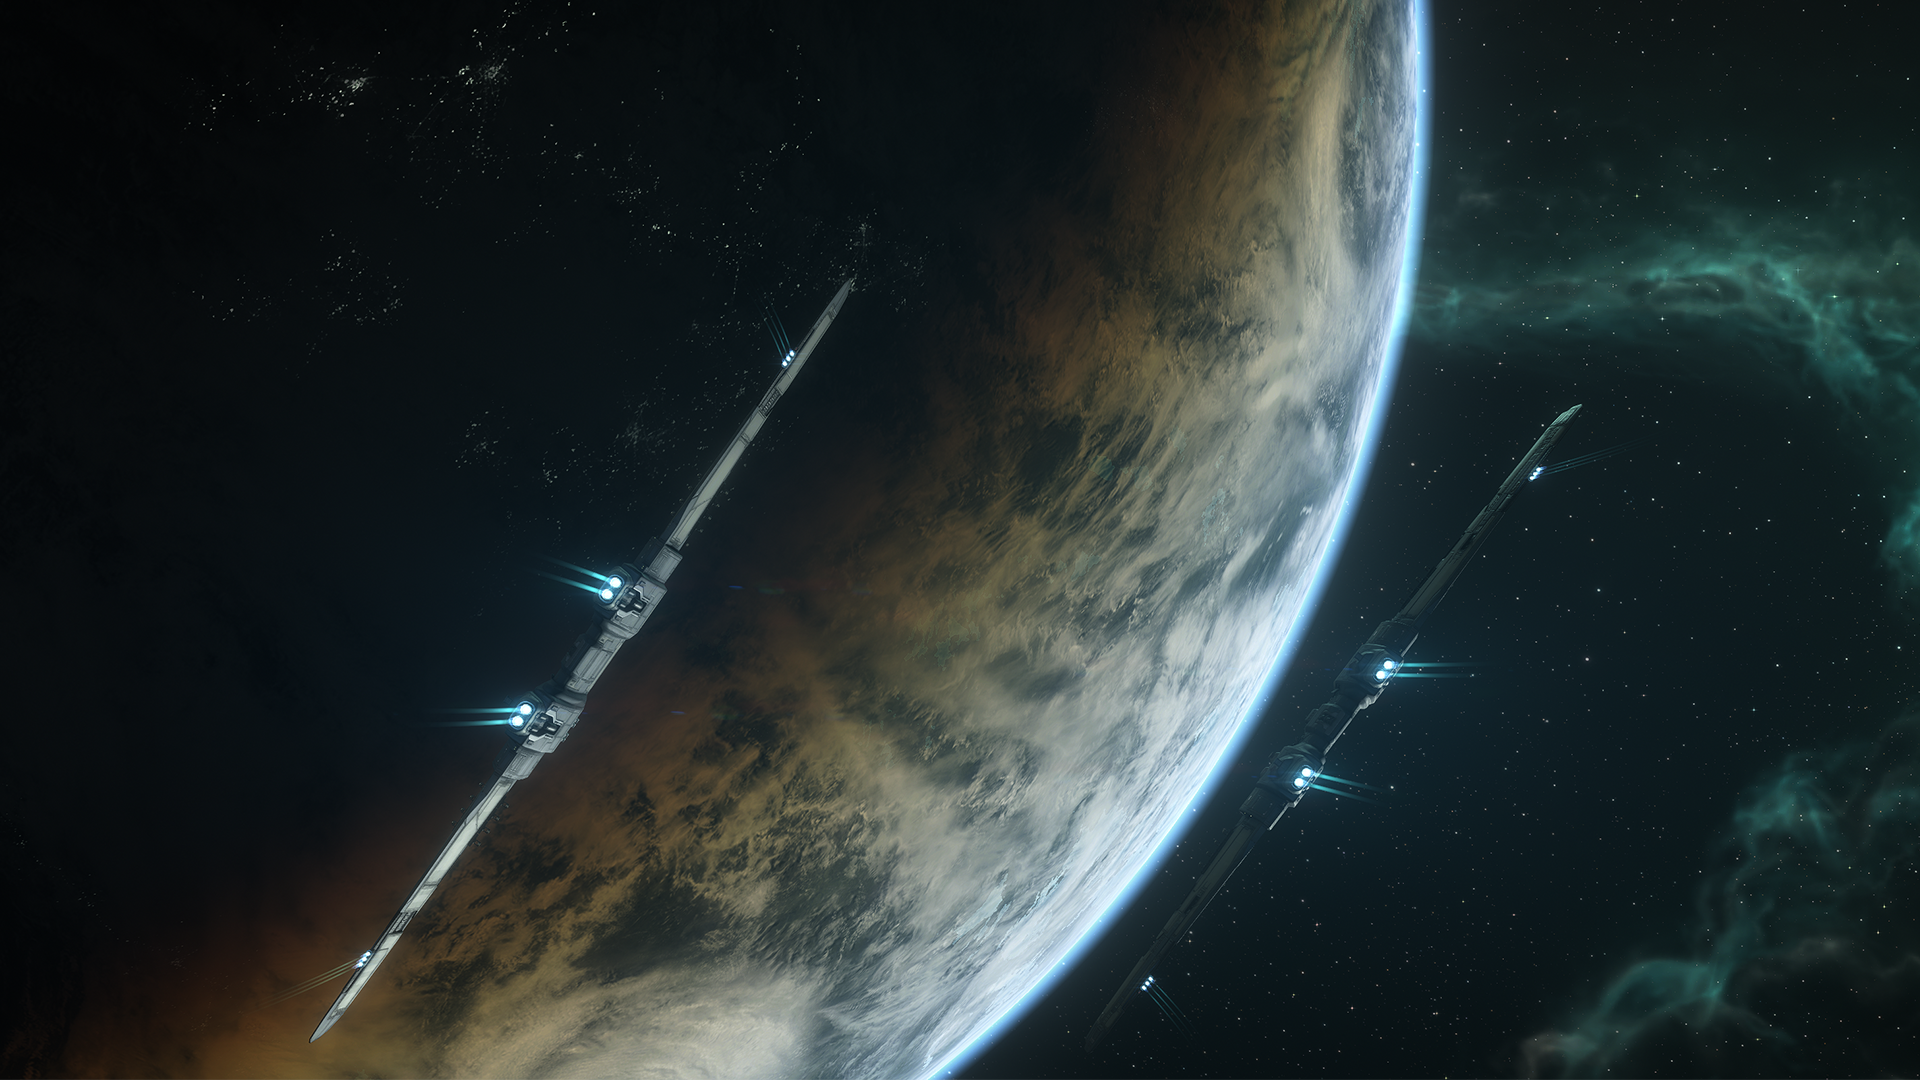 Video Game EVE Online HD Wallpaper | Background Image